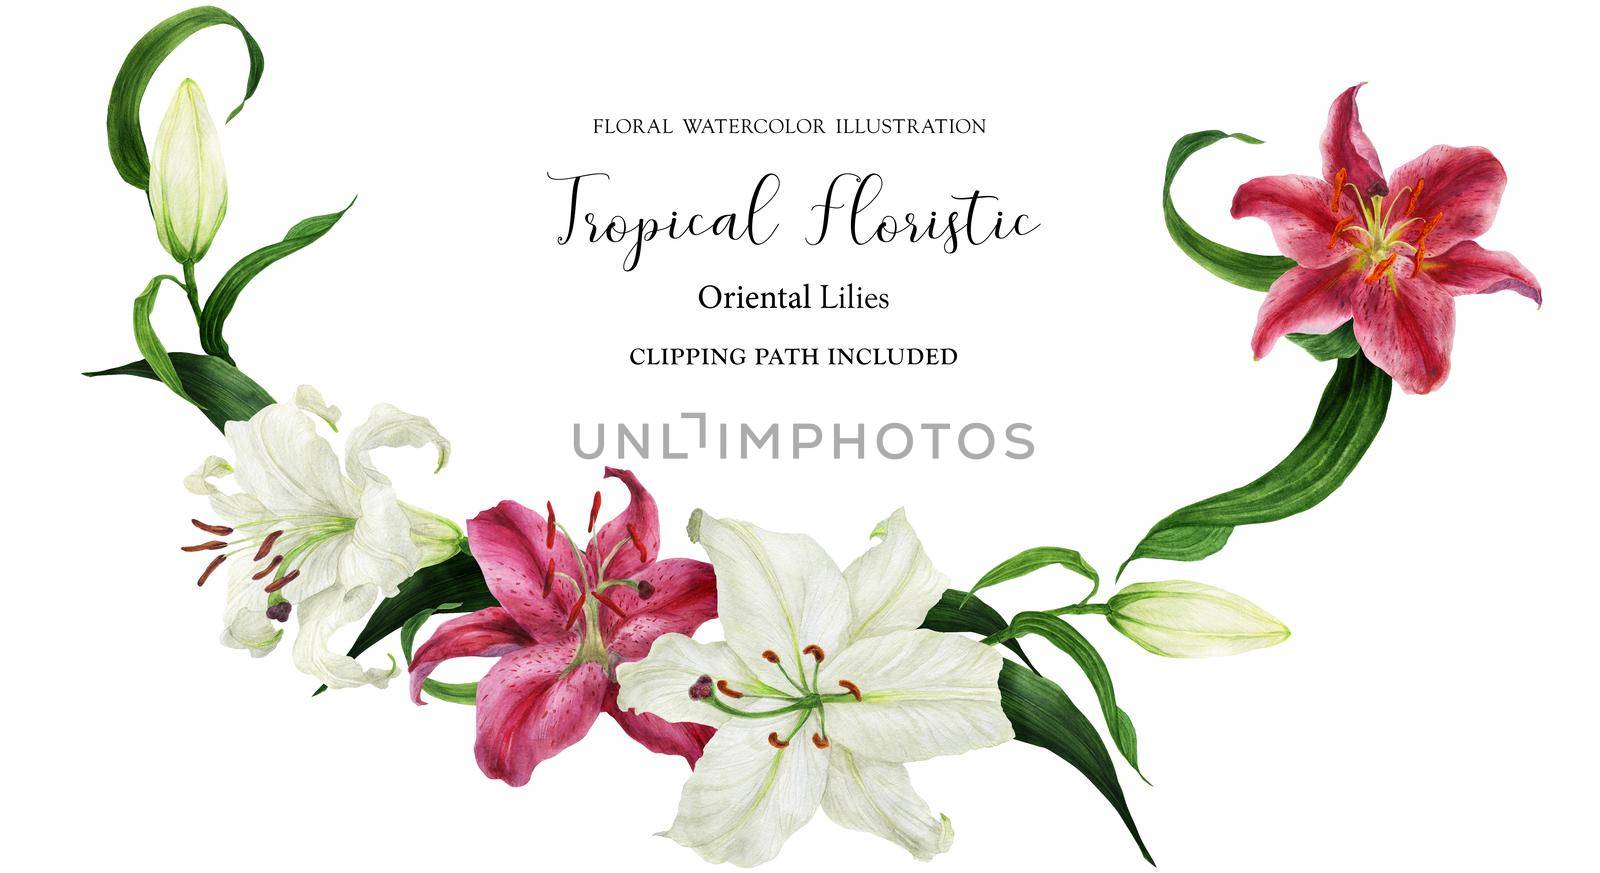 Tropical floral watercolor garland with oriental white and pink lilies, illustration with clipping path